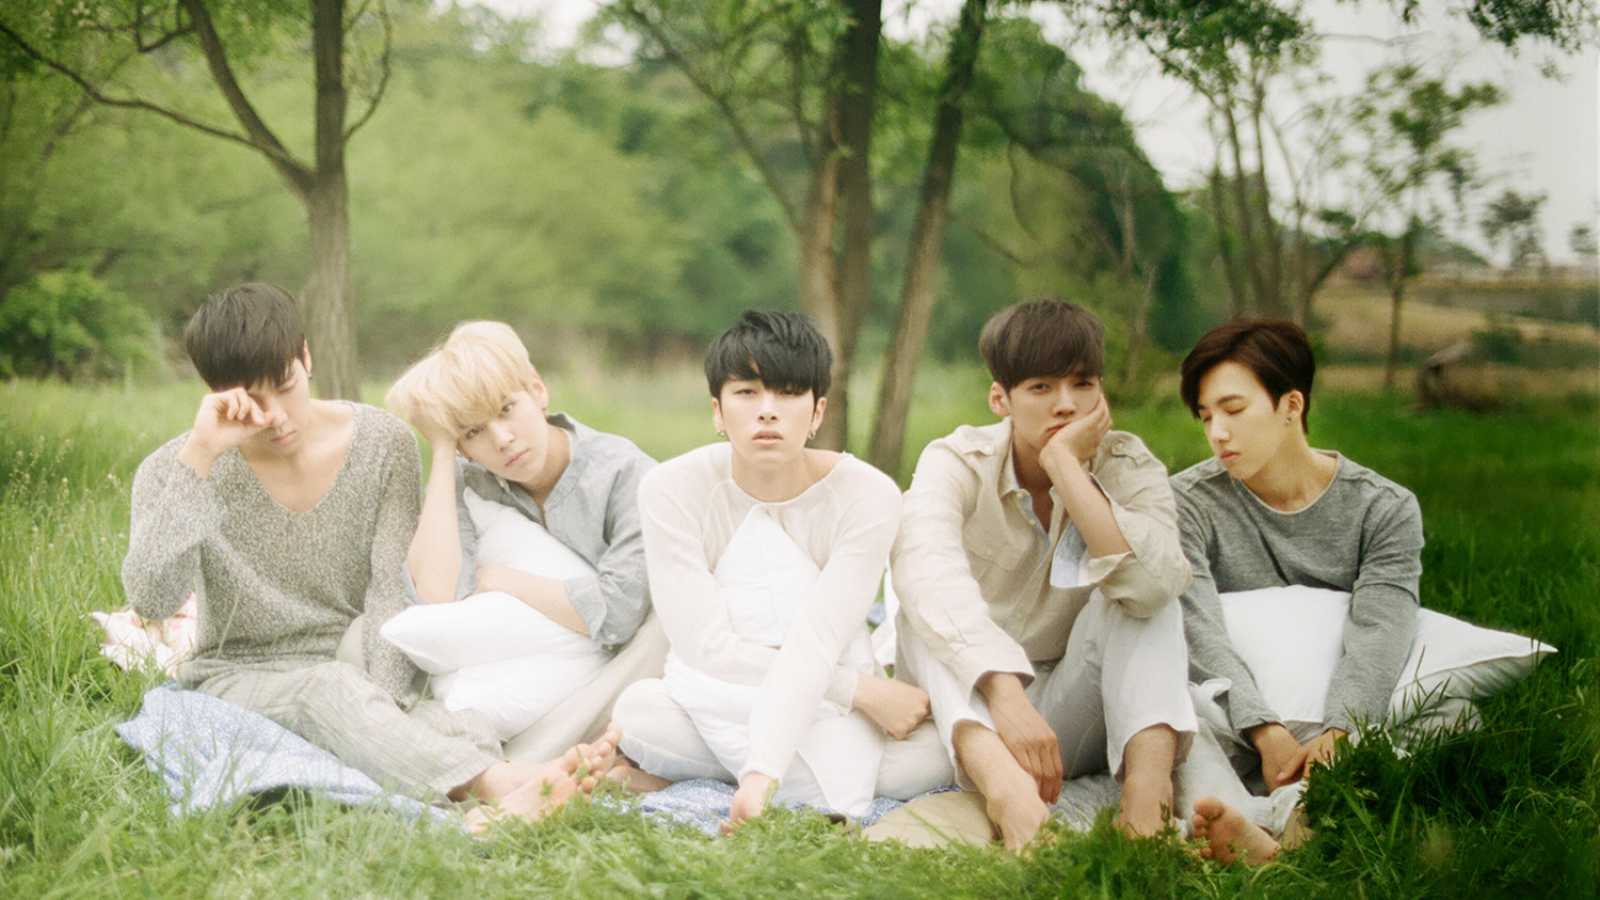 Boys Republic © Universal Music Korea. All rights reserved